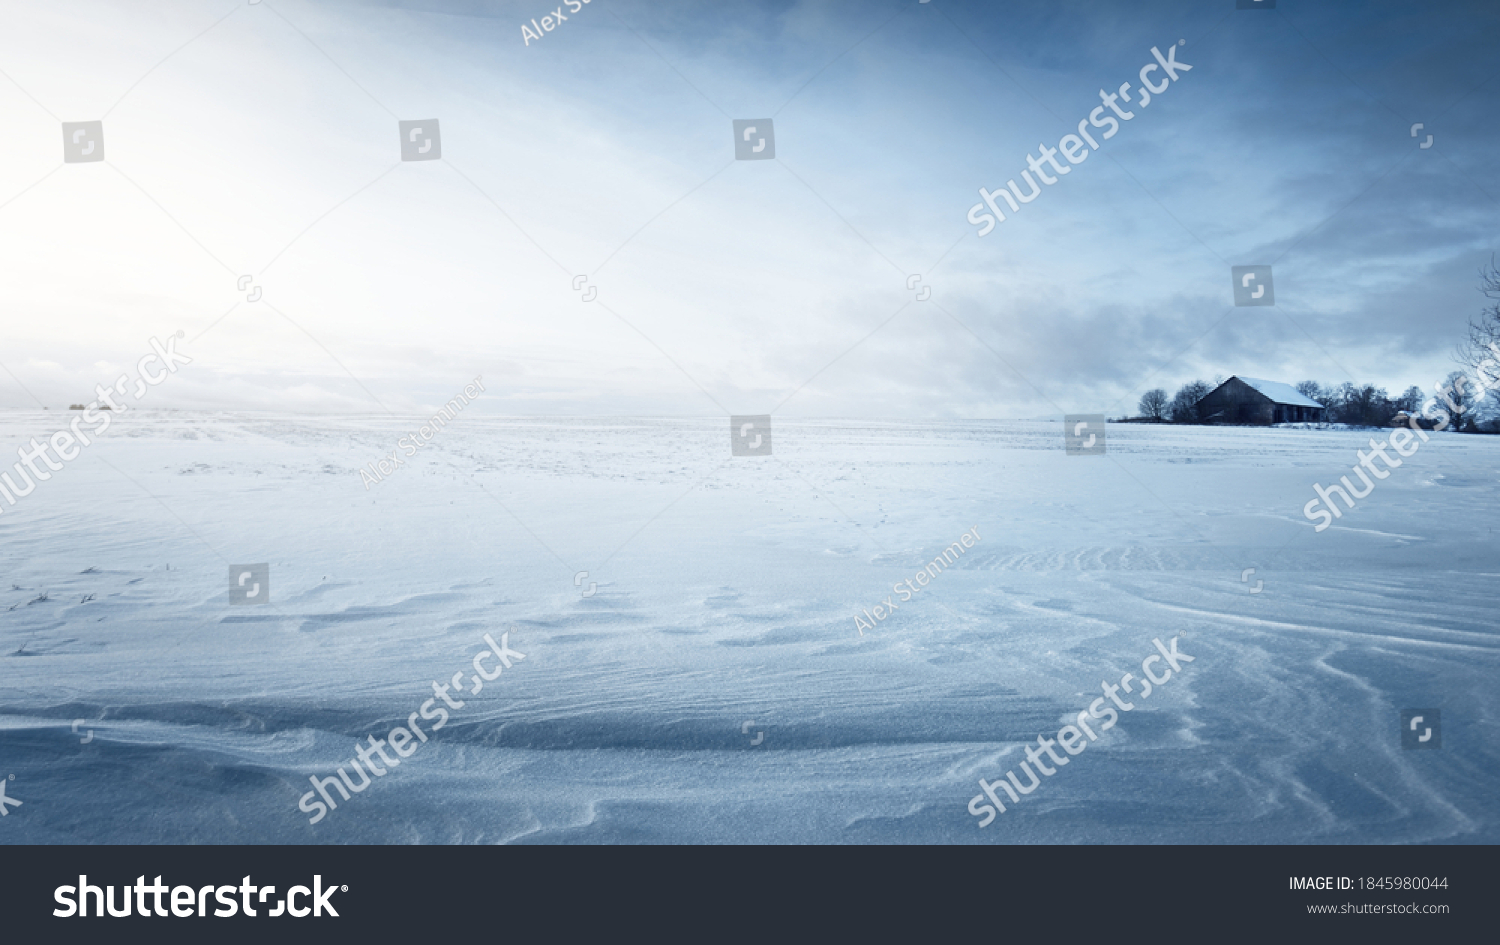 Panoramic view of the snow-covered field after a blizzard at sunset. Human tracks in a fresh snow. Old rustic wooden house in the background. Ice desert. Global warming theme. Lapland, Finland #1845980044